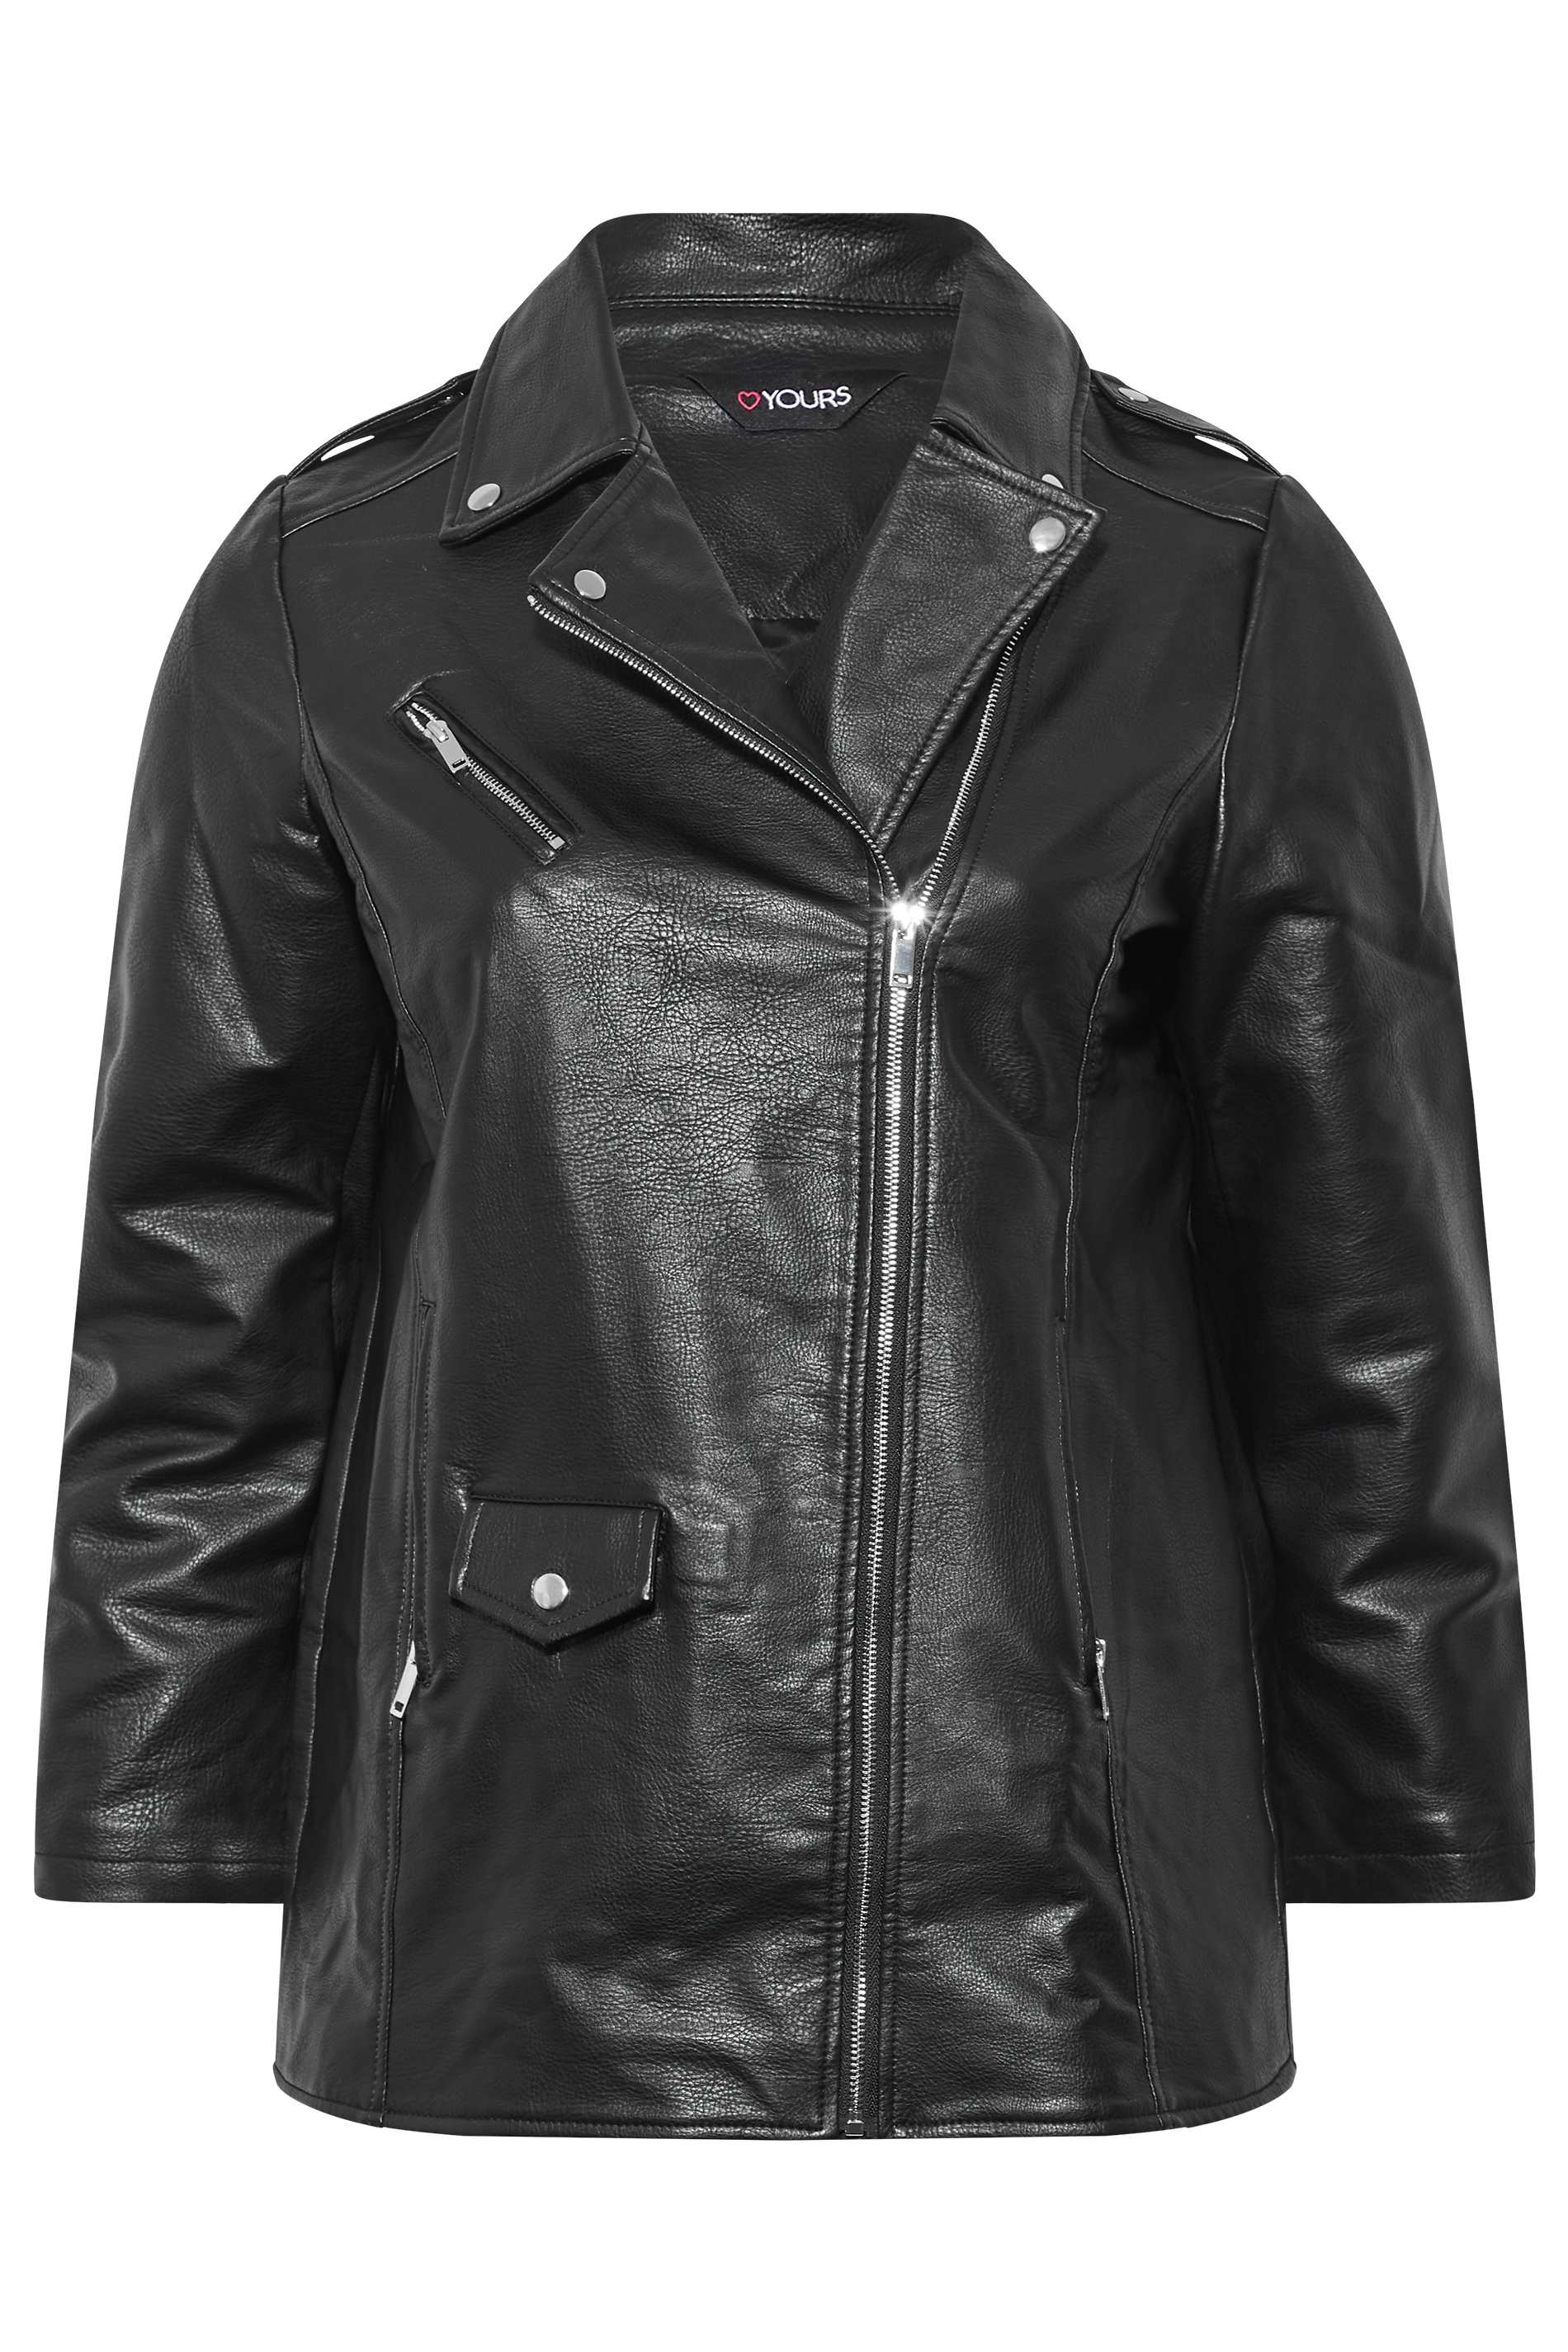 New Mens Black Quilted Motorcycle Jacket | Black Biker Leather Jacket For  Men | Brando Vintage Riding Moto Jacket | Xs - 4xL (Extra Small) (D4U-104)  at Amazon Men's Clothing store